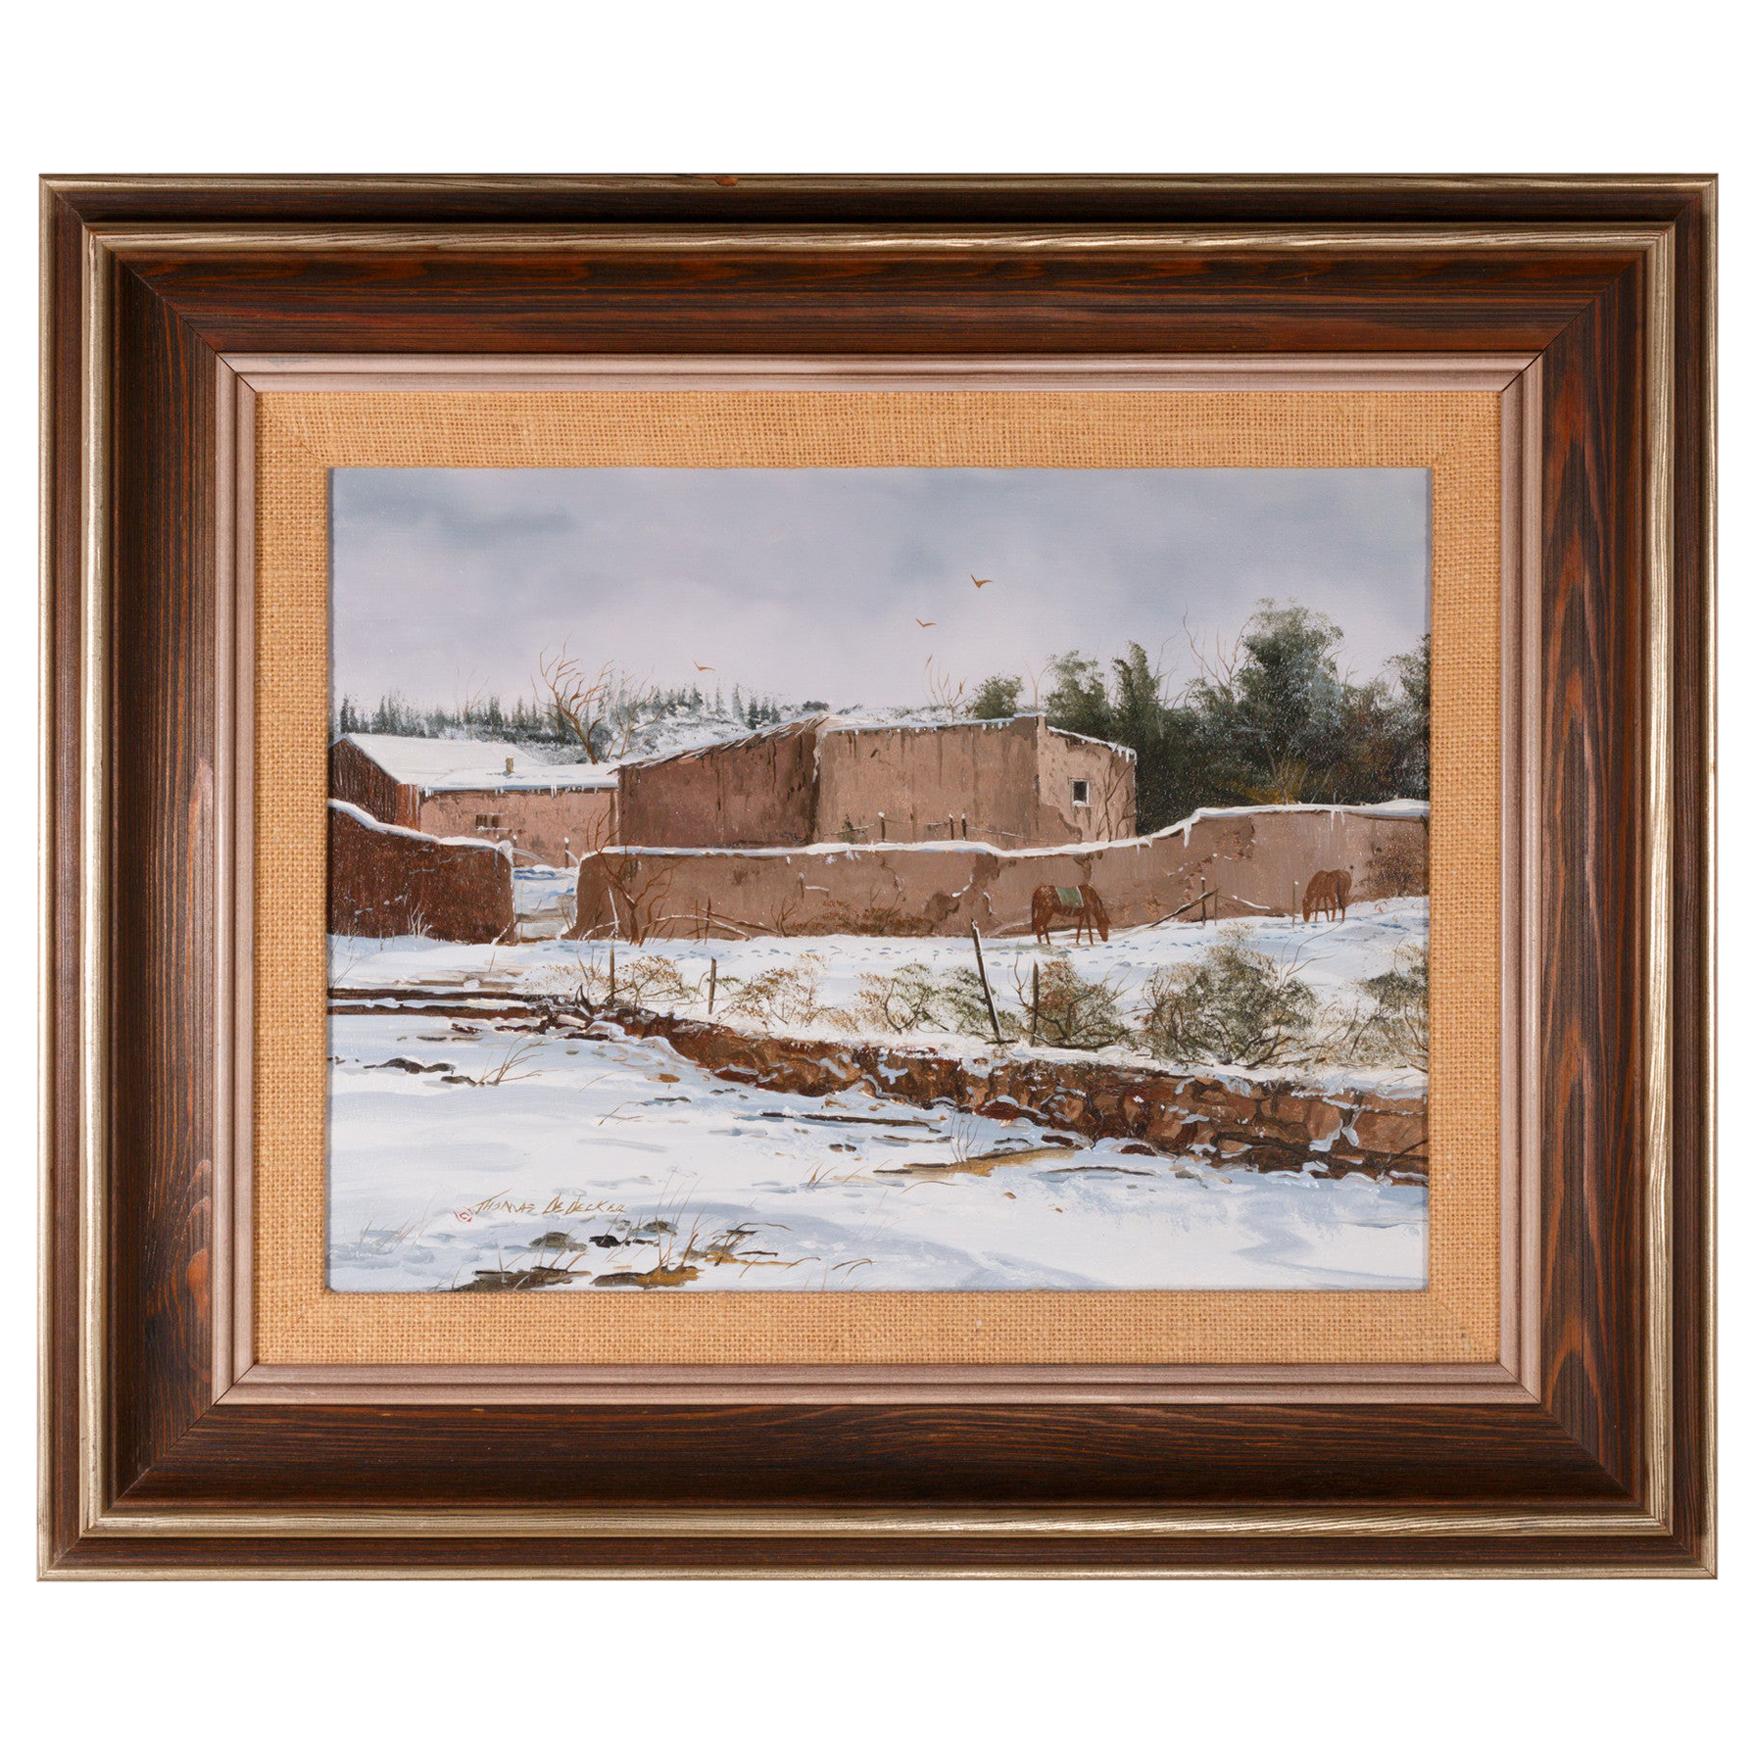 Original Painting "Southwest Ranch" by Thomas DeDecker For Sale